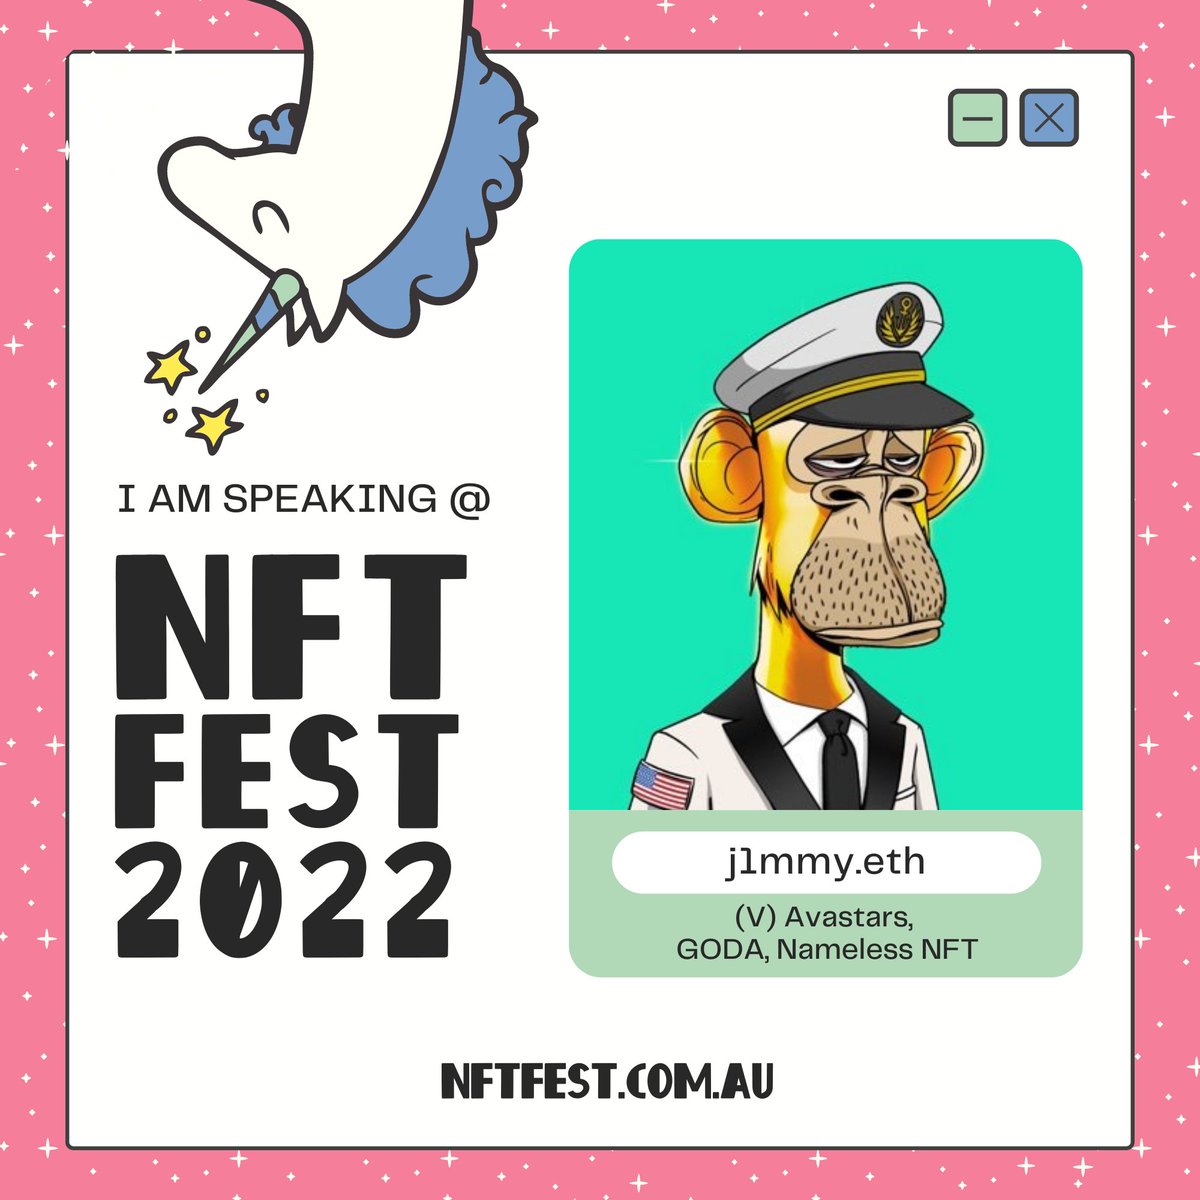 Cannot wait to hear from a true NFT OG, @j1mmyeth at NFT Fest 2022! j1mmy is the founder of @AvaStarsNFT & @nameless_nft. He is also the co-founder of @TheGoda_io and part of @therealkingship. A truly extensive NFT resume!